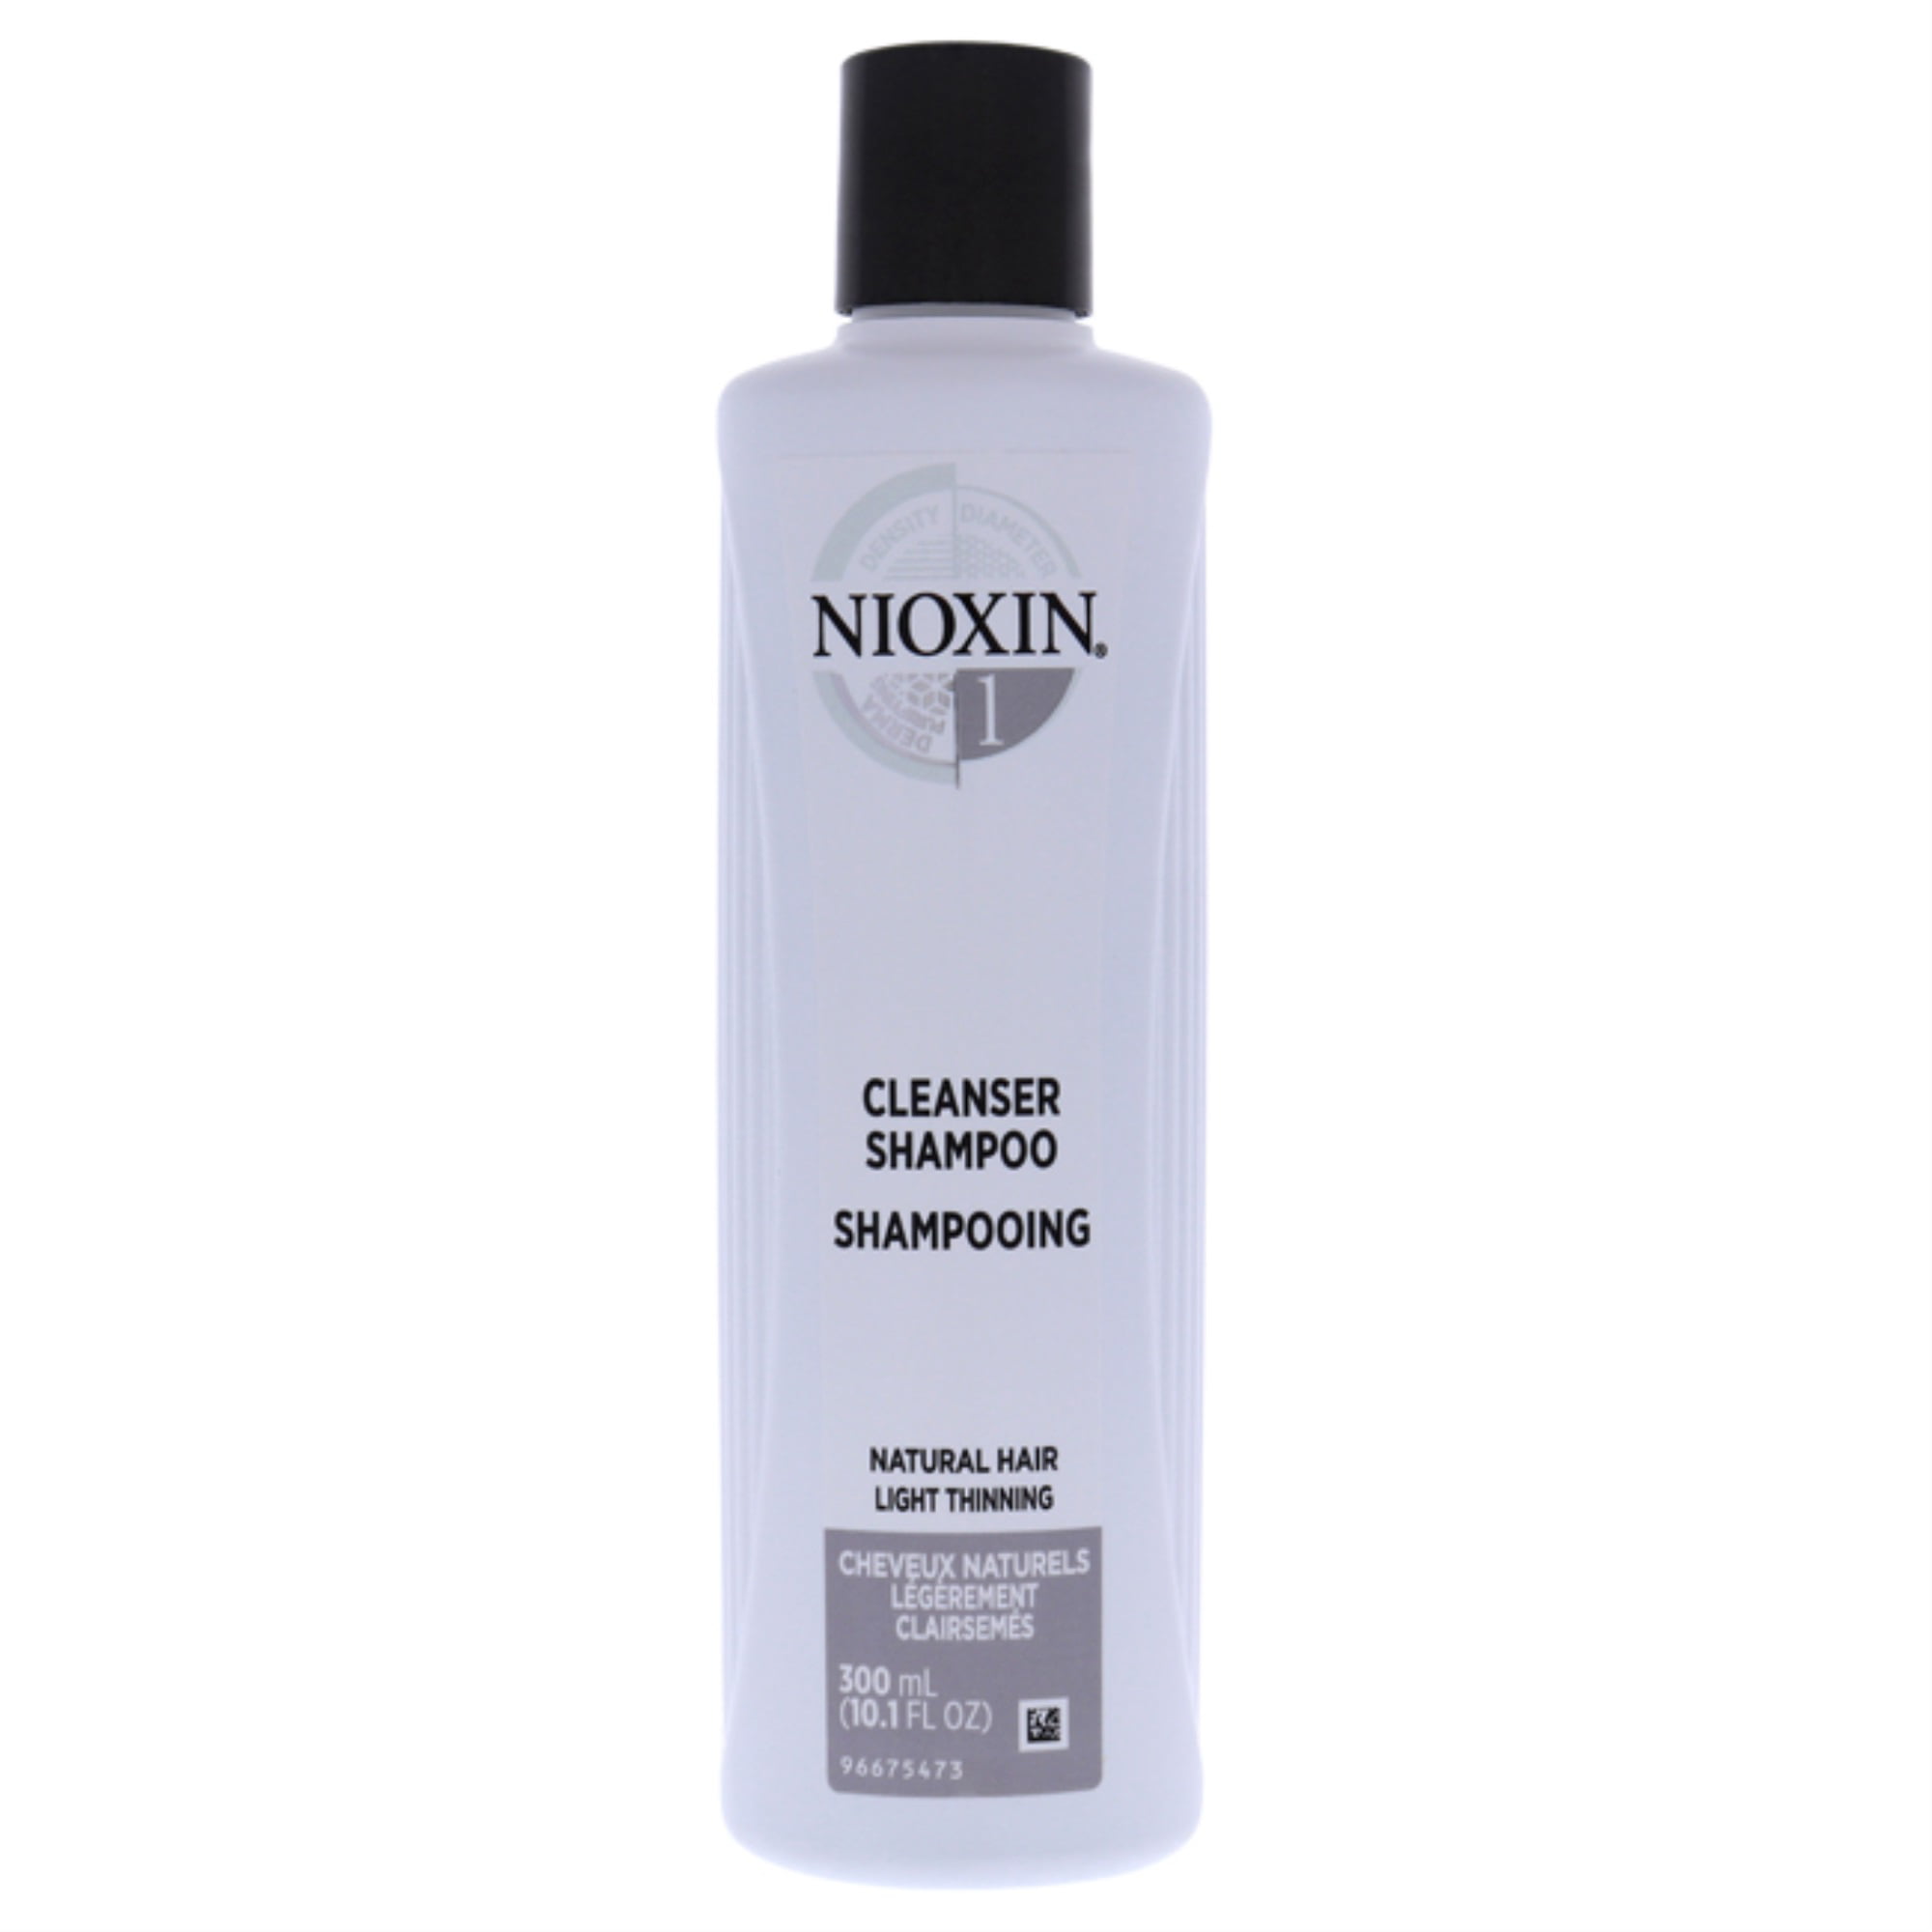 System 1 Cleanser Shampoo For Natural Hair - Light Thinning by Nioxin for  Unisex  oz Cleanser 